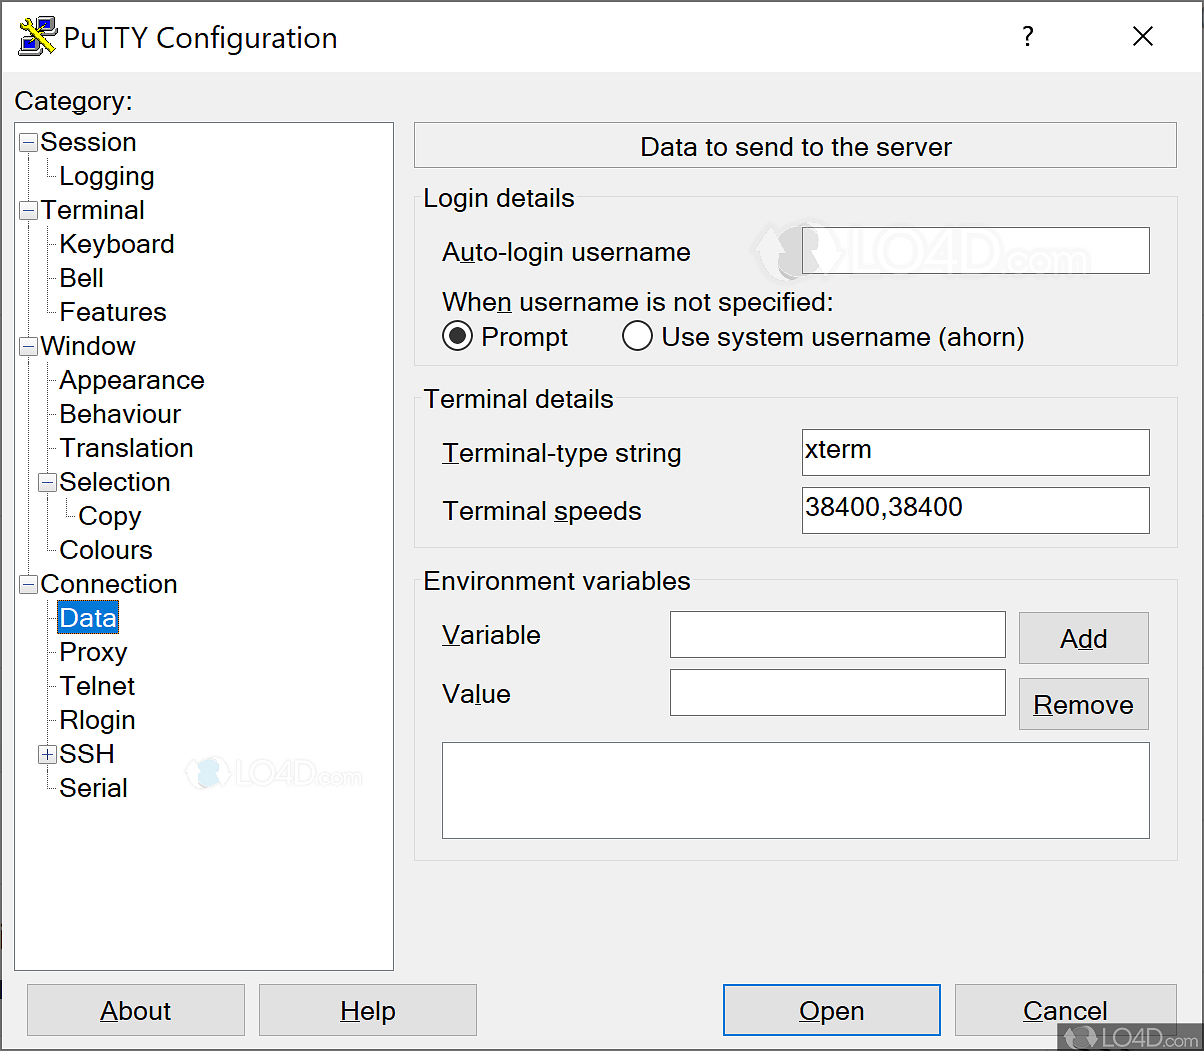 free download putty software for windows 10 64 bit